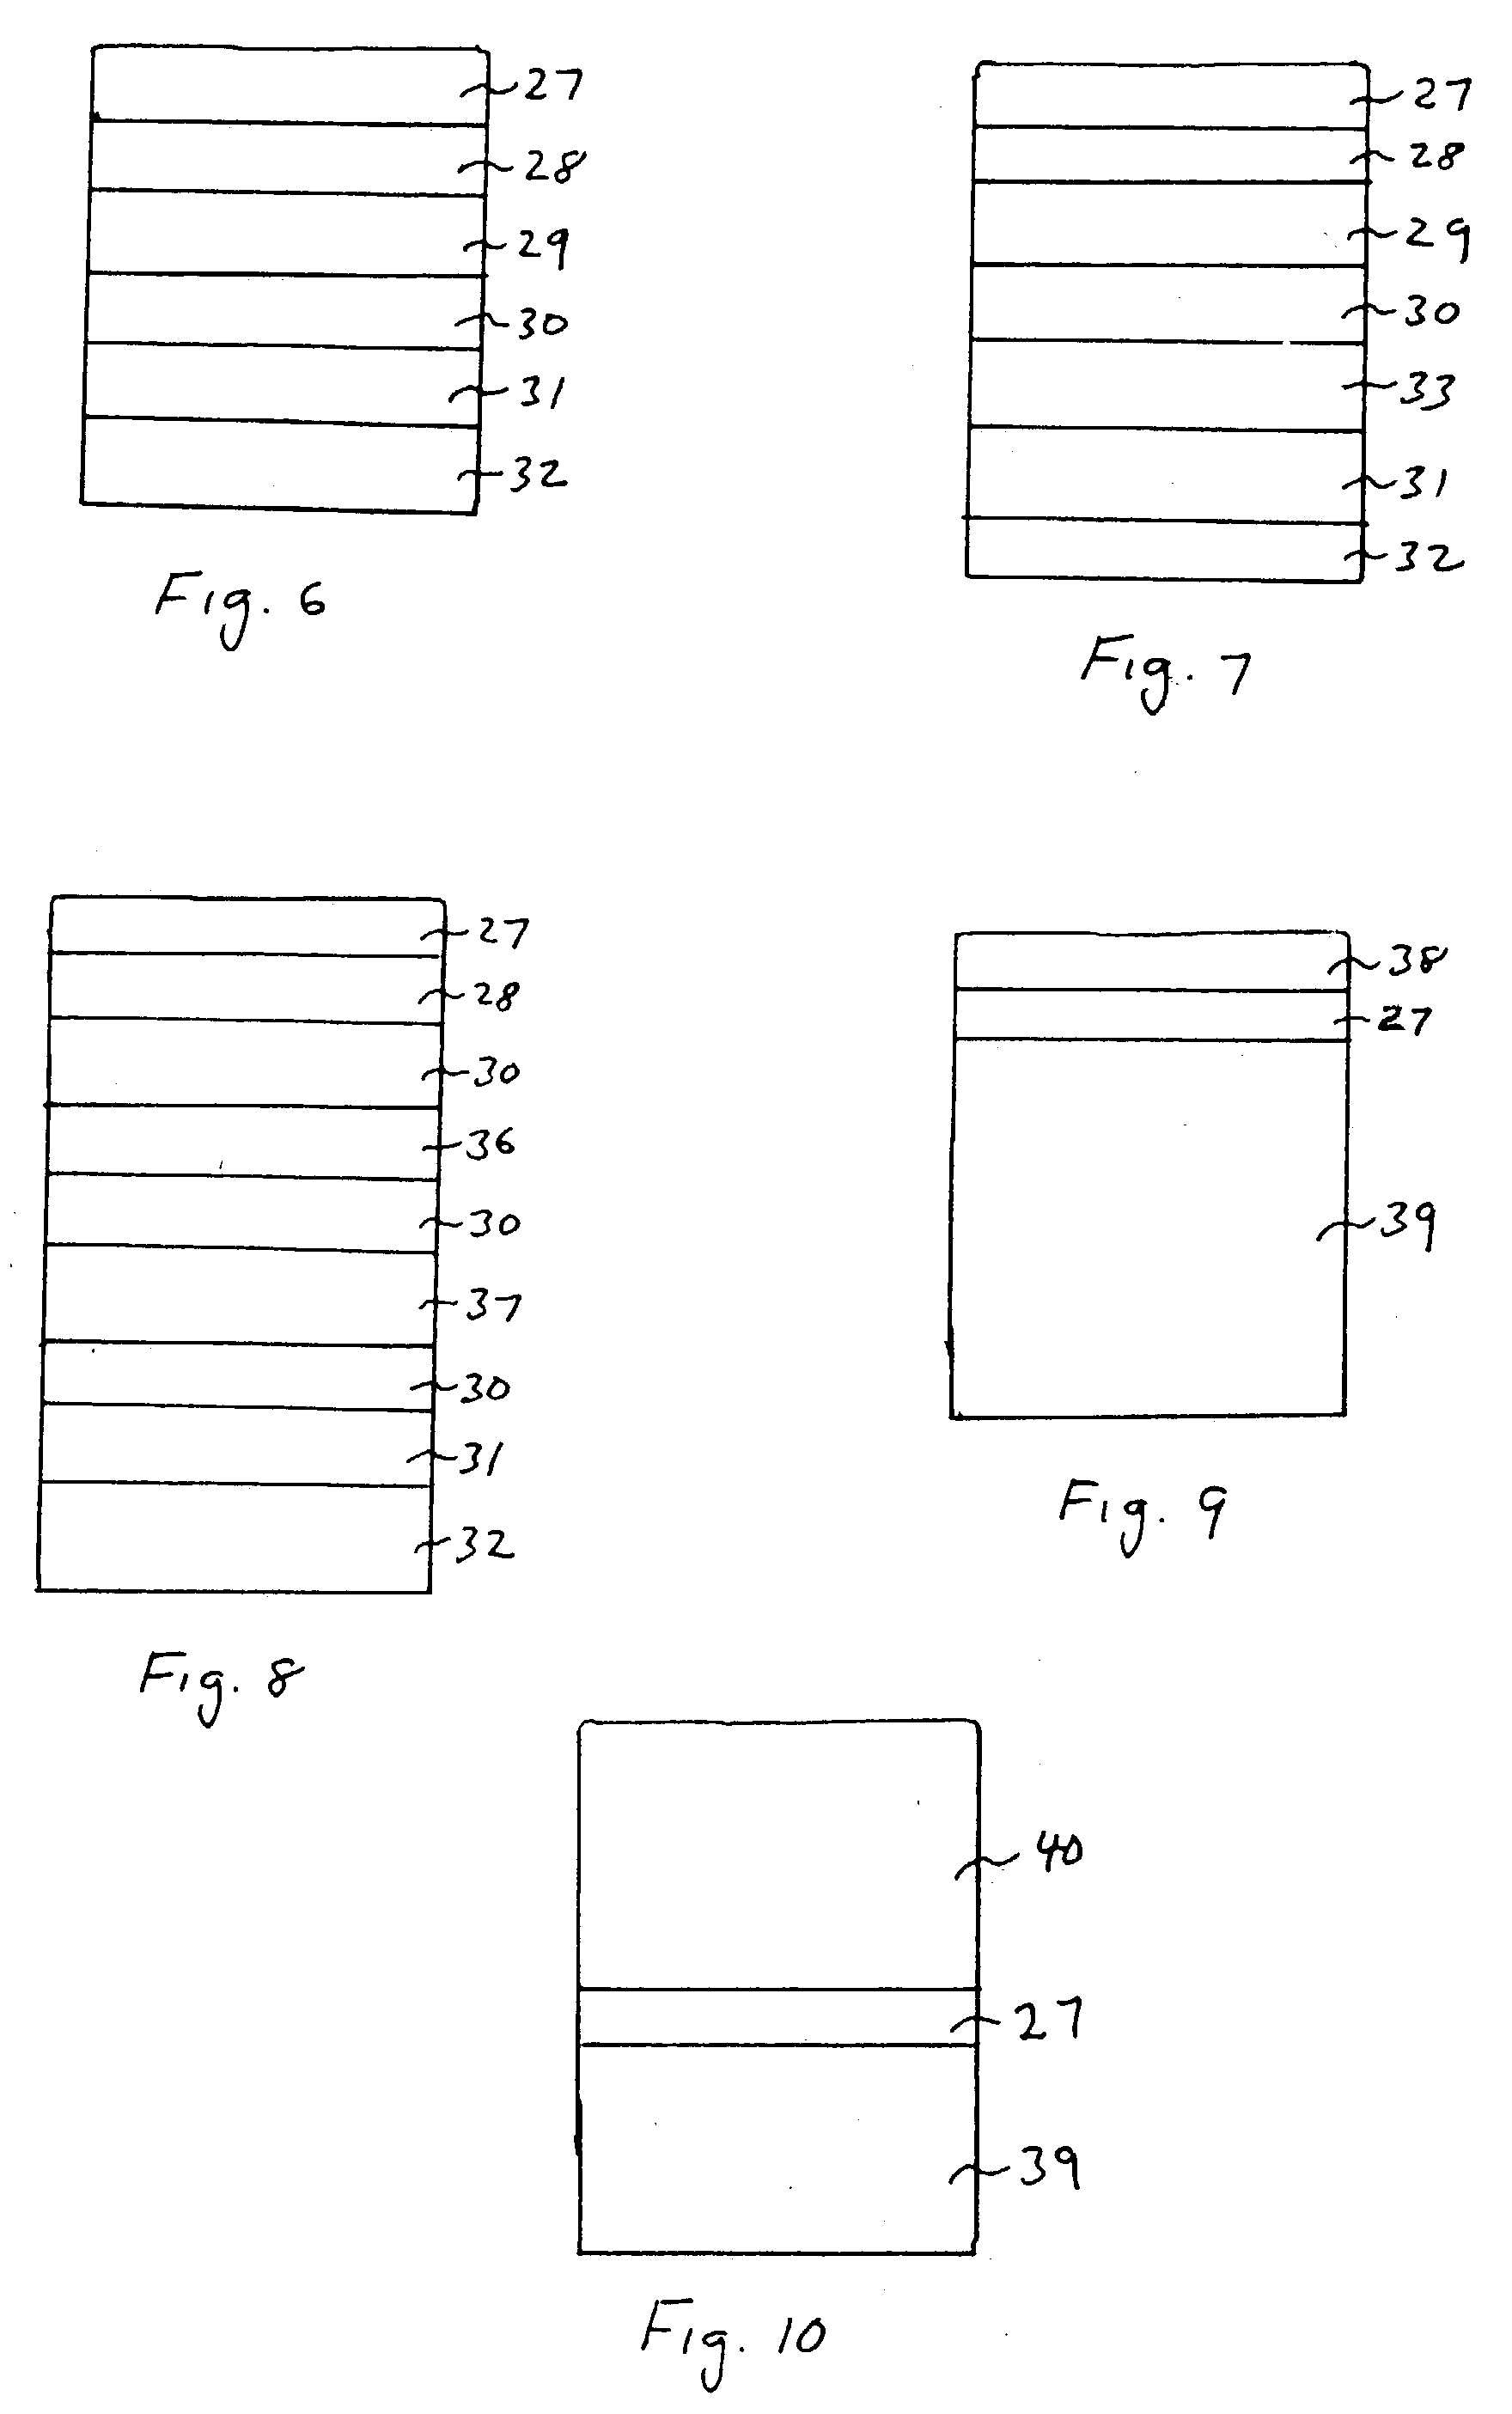 System and methods for filtering electromagnetic visual, and minimizing acoustic transmissions